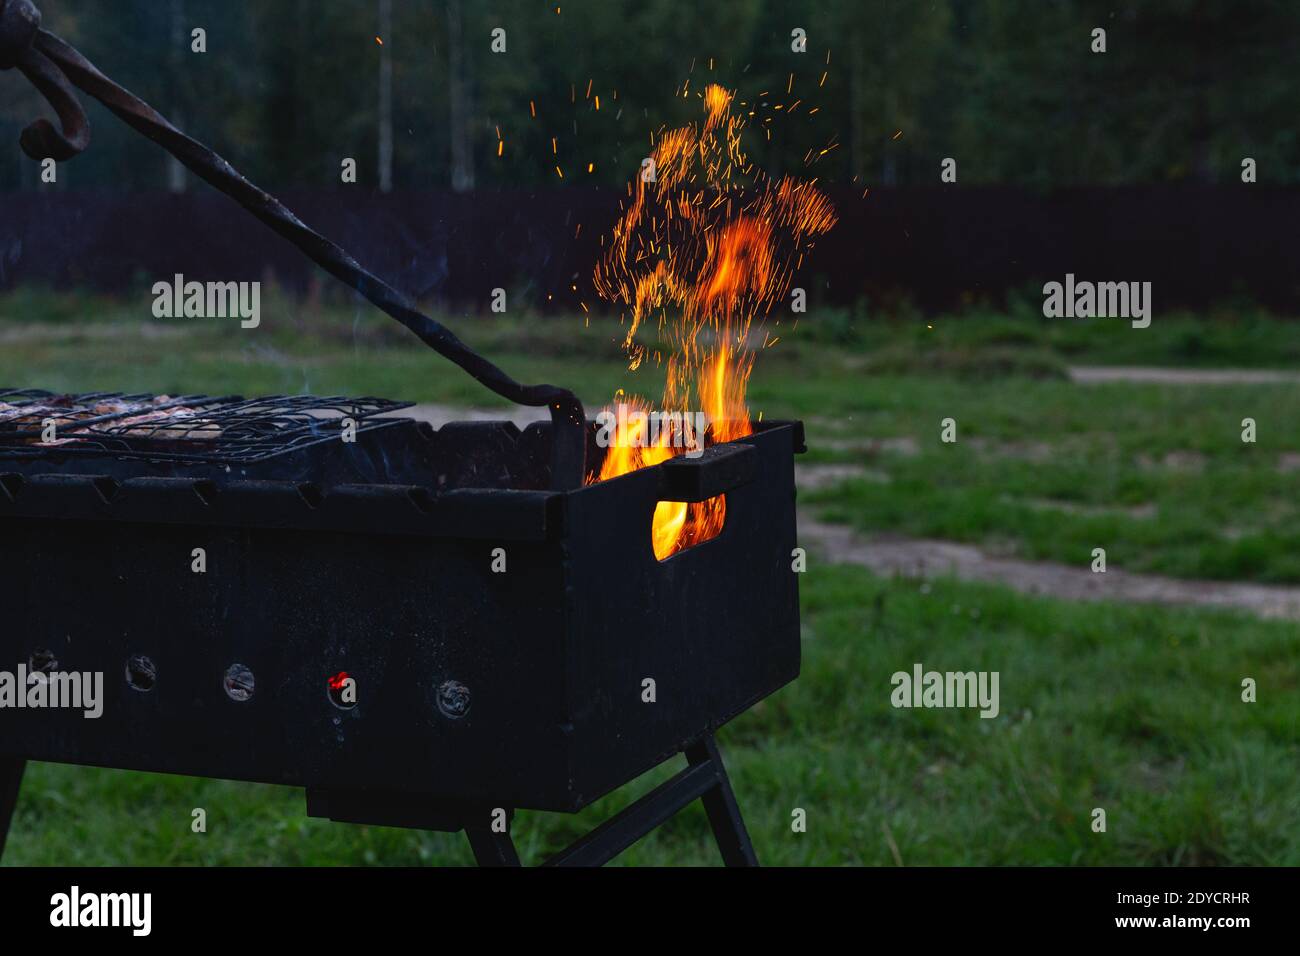 Meat is grilled. A man stirring coals with a hot poker. Sparks fly from fire in grill. Outdoor cooking. Picnic, weekend Stock Photo